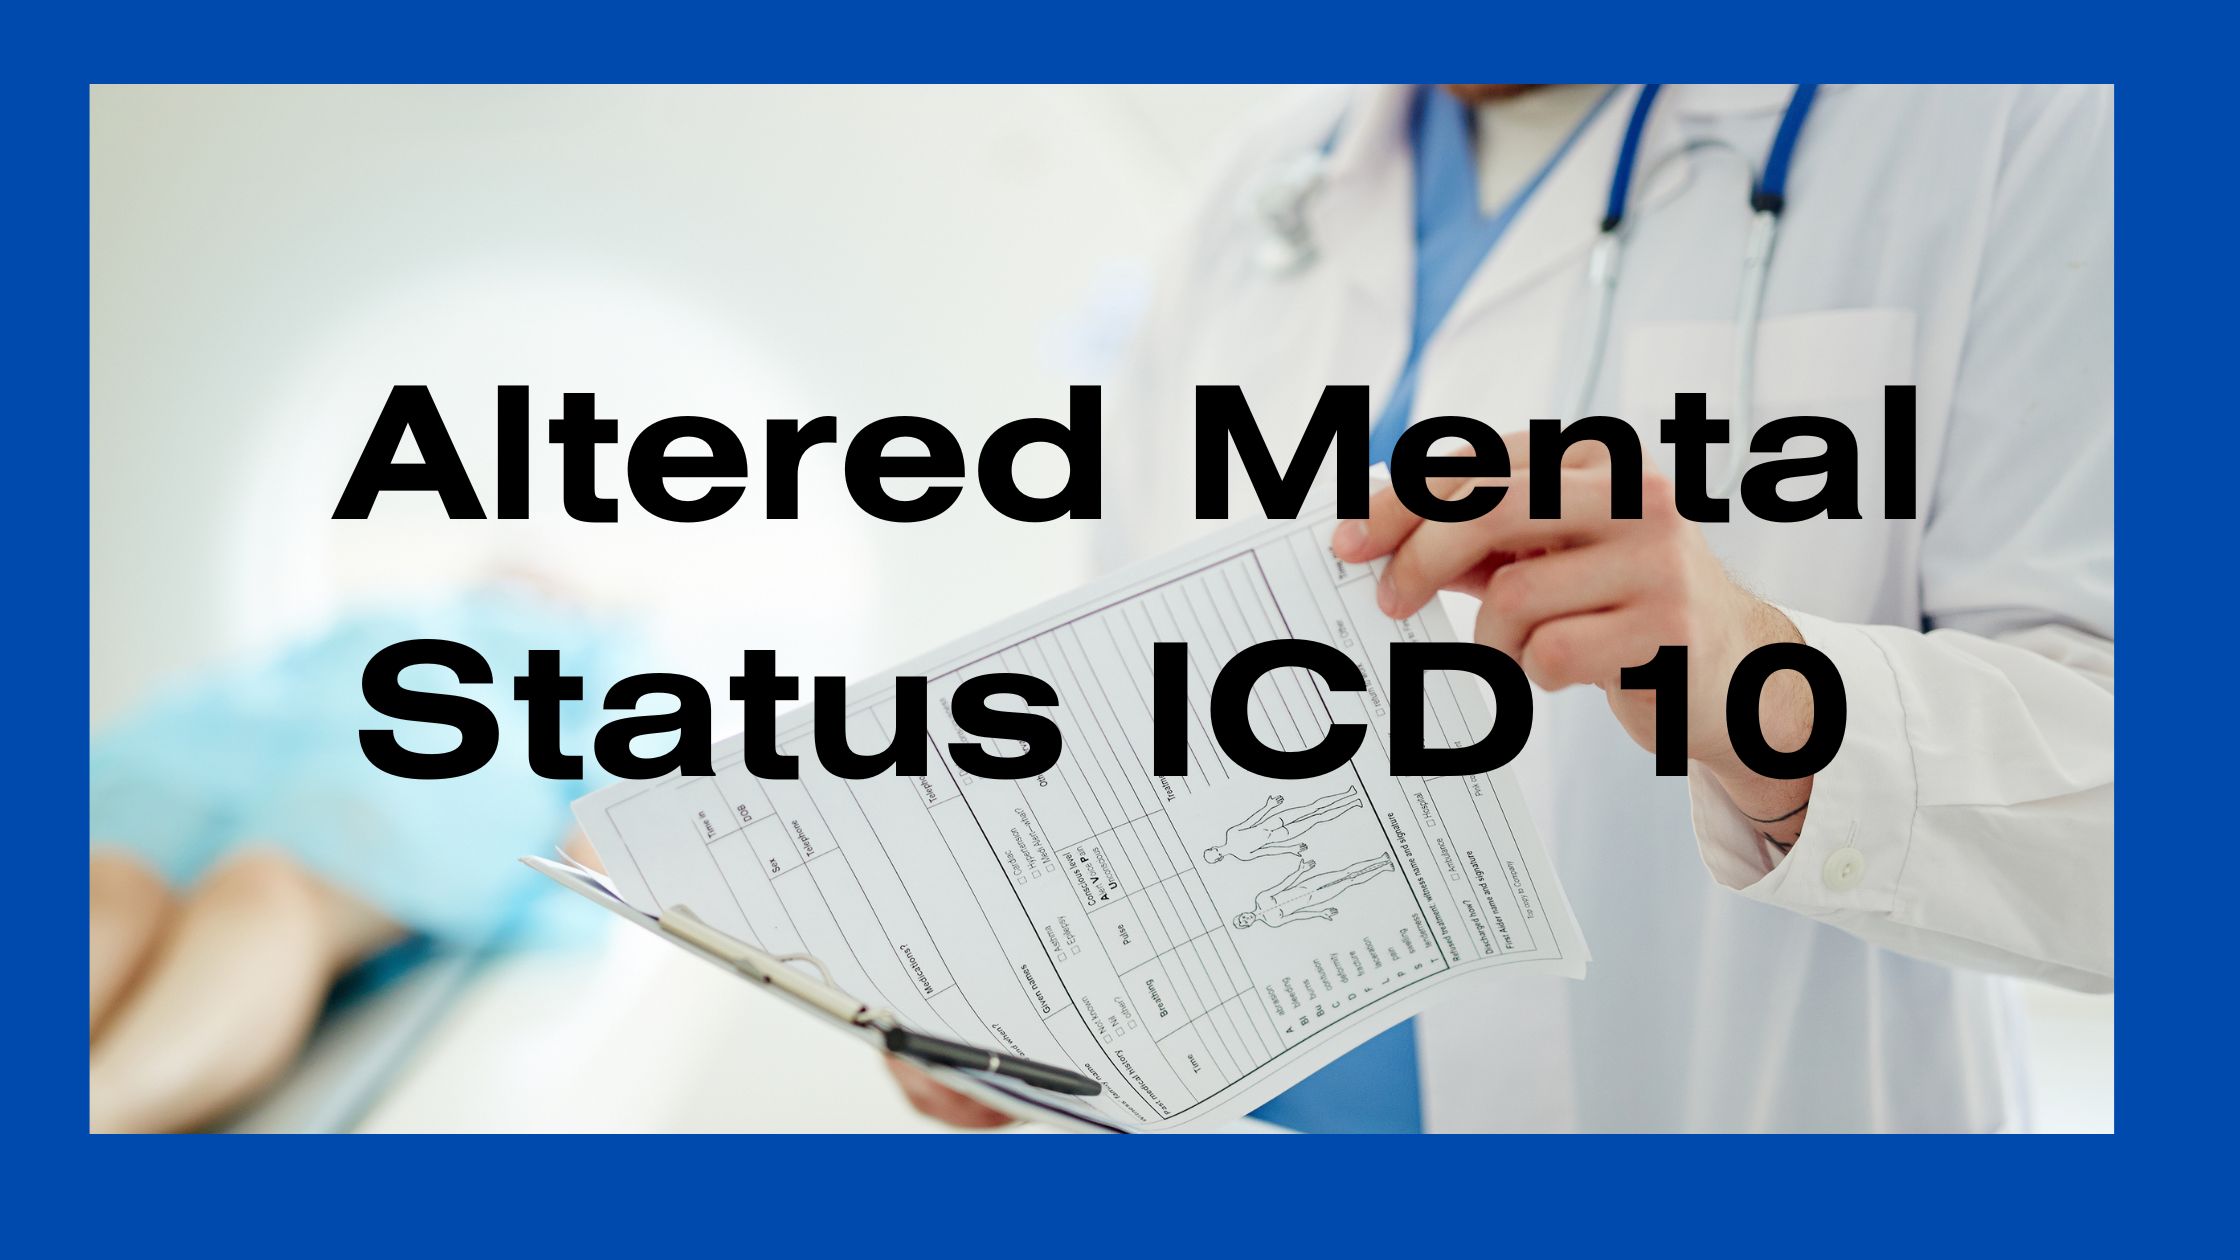 altered mental status icd 10 code